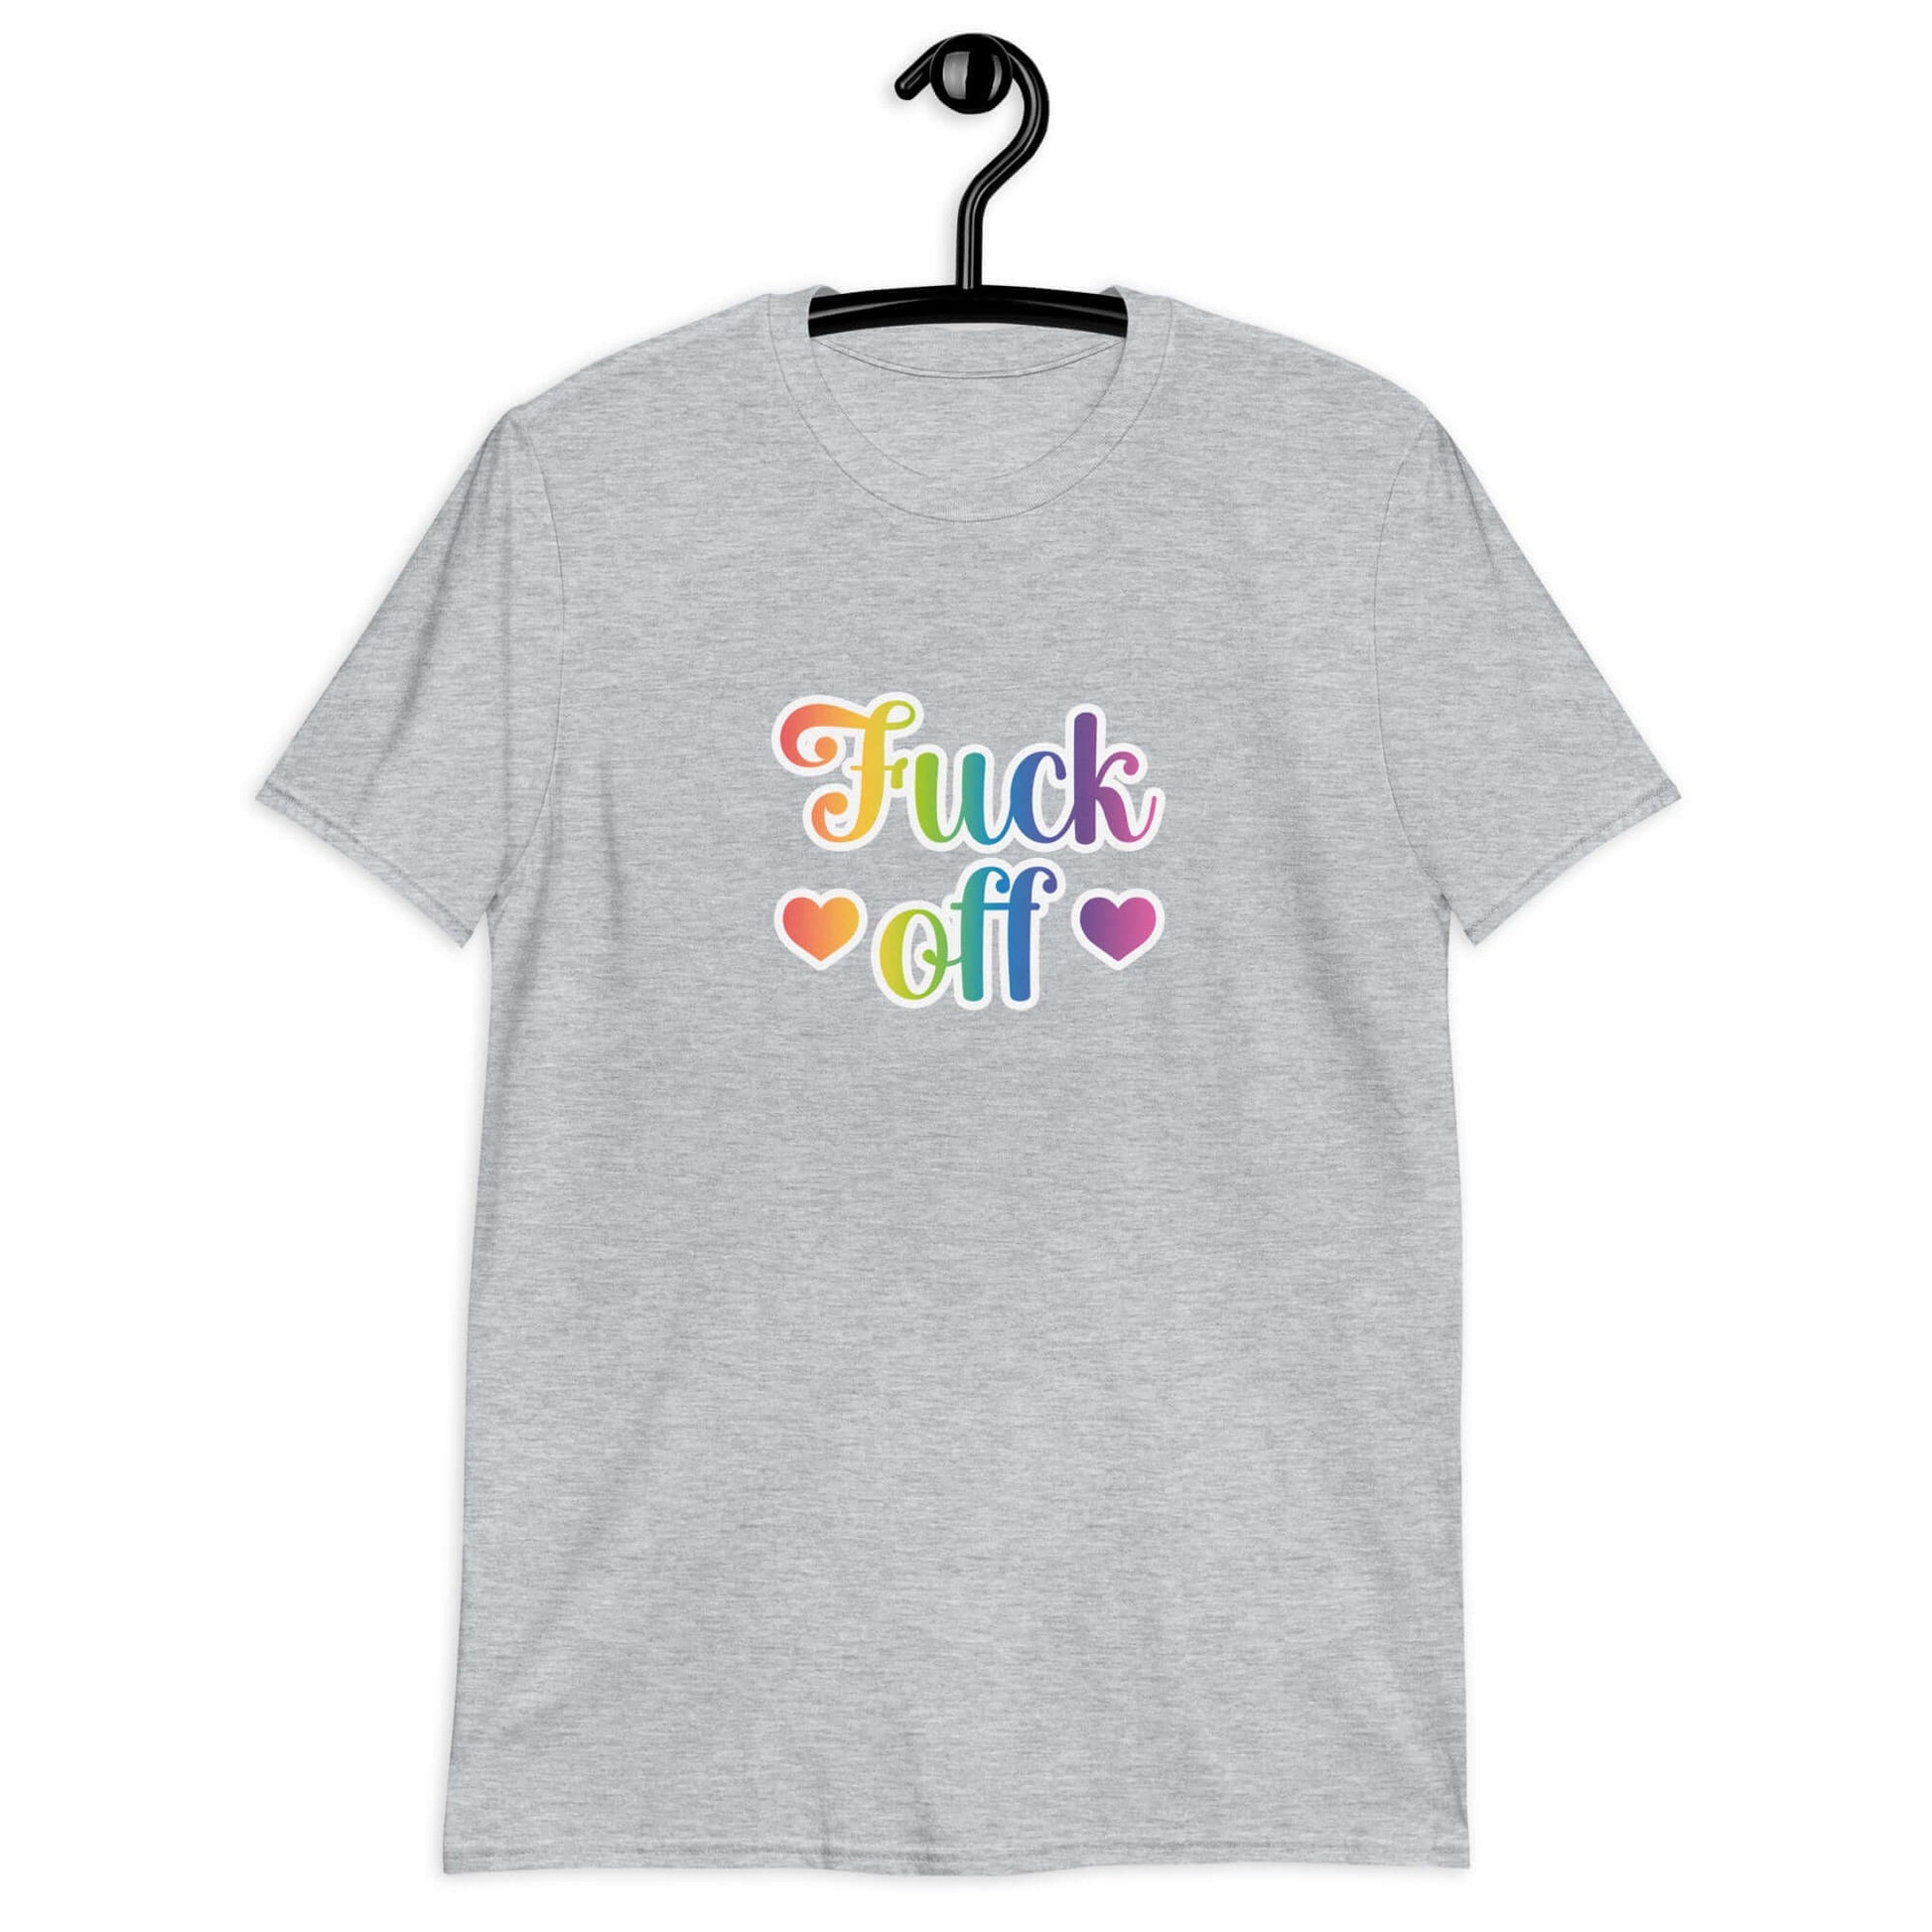 Light grey t-shirt with the words Fuck off printed in 80's style rainbow font. The graphics are printed on the front of the shirt.